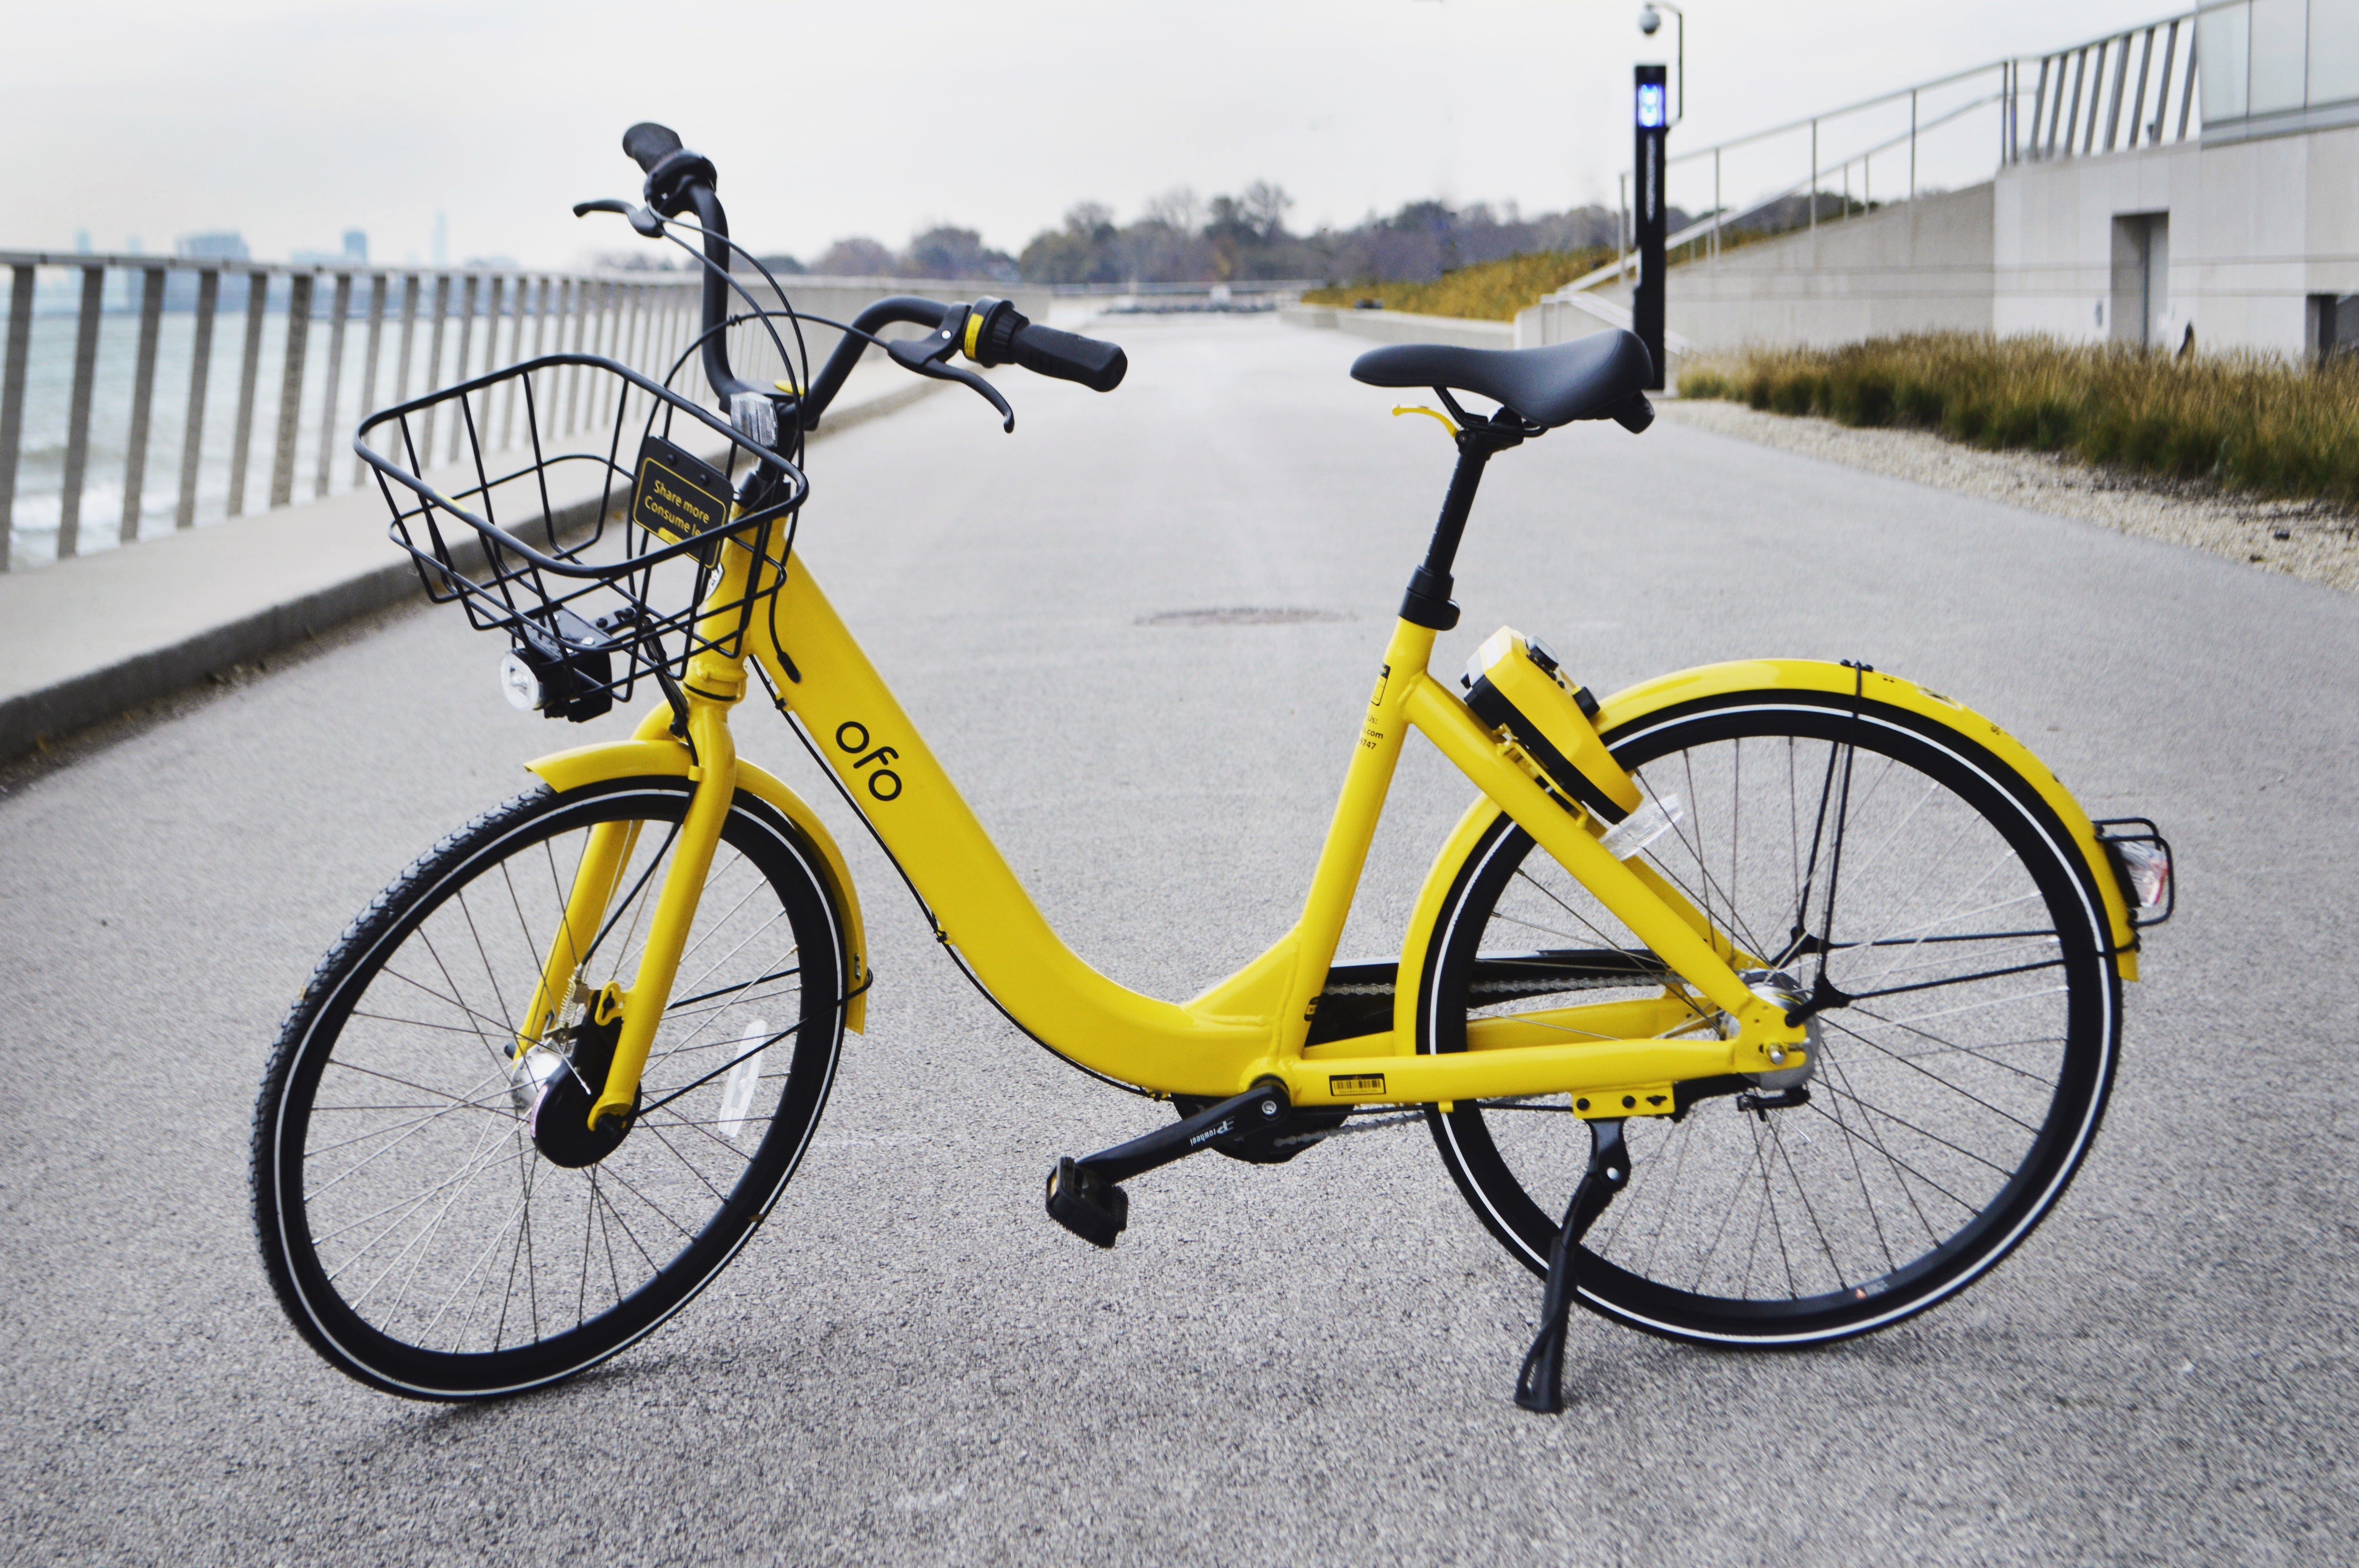  Dockless bike-share provider ofo, now operating in Camden, says it would apply to operate in Philadelphia once the licensing regime is in place.